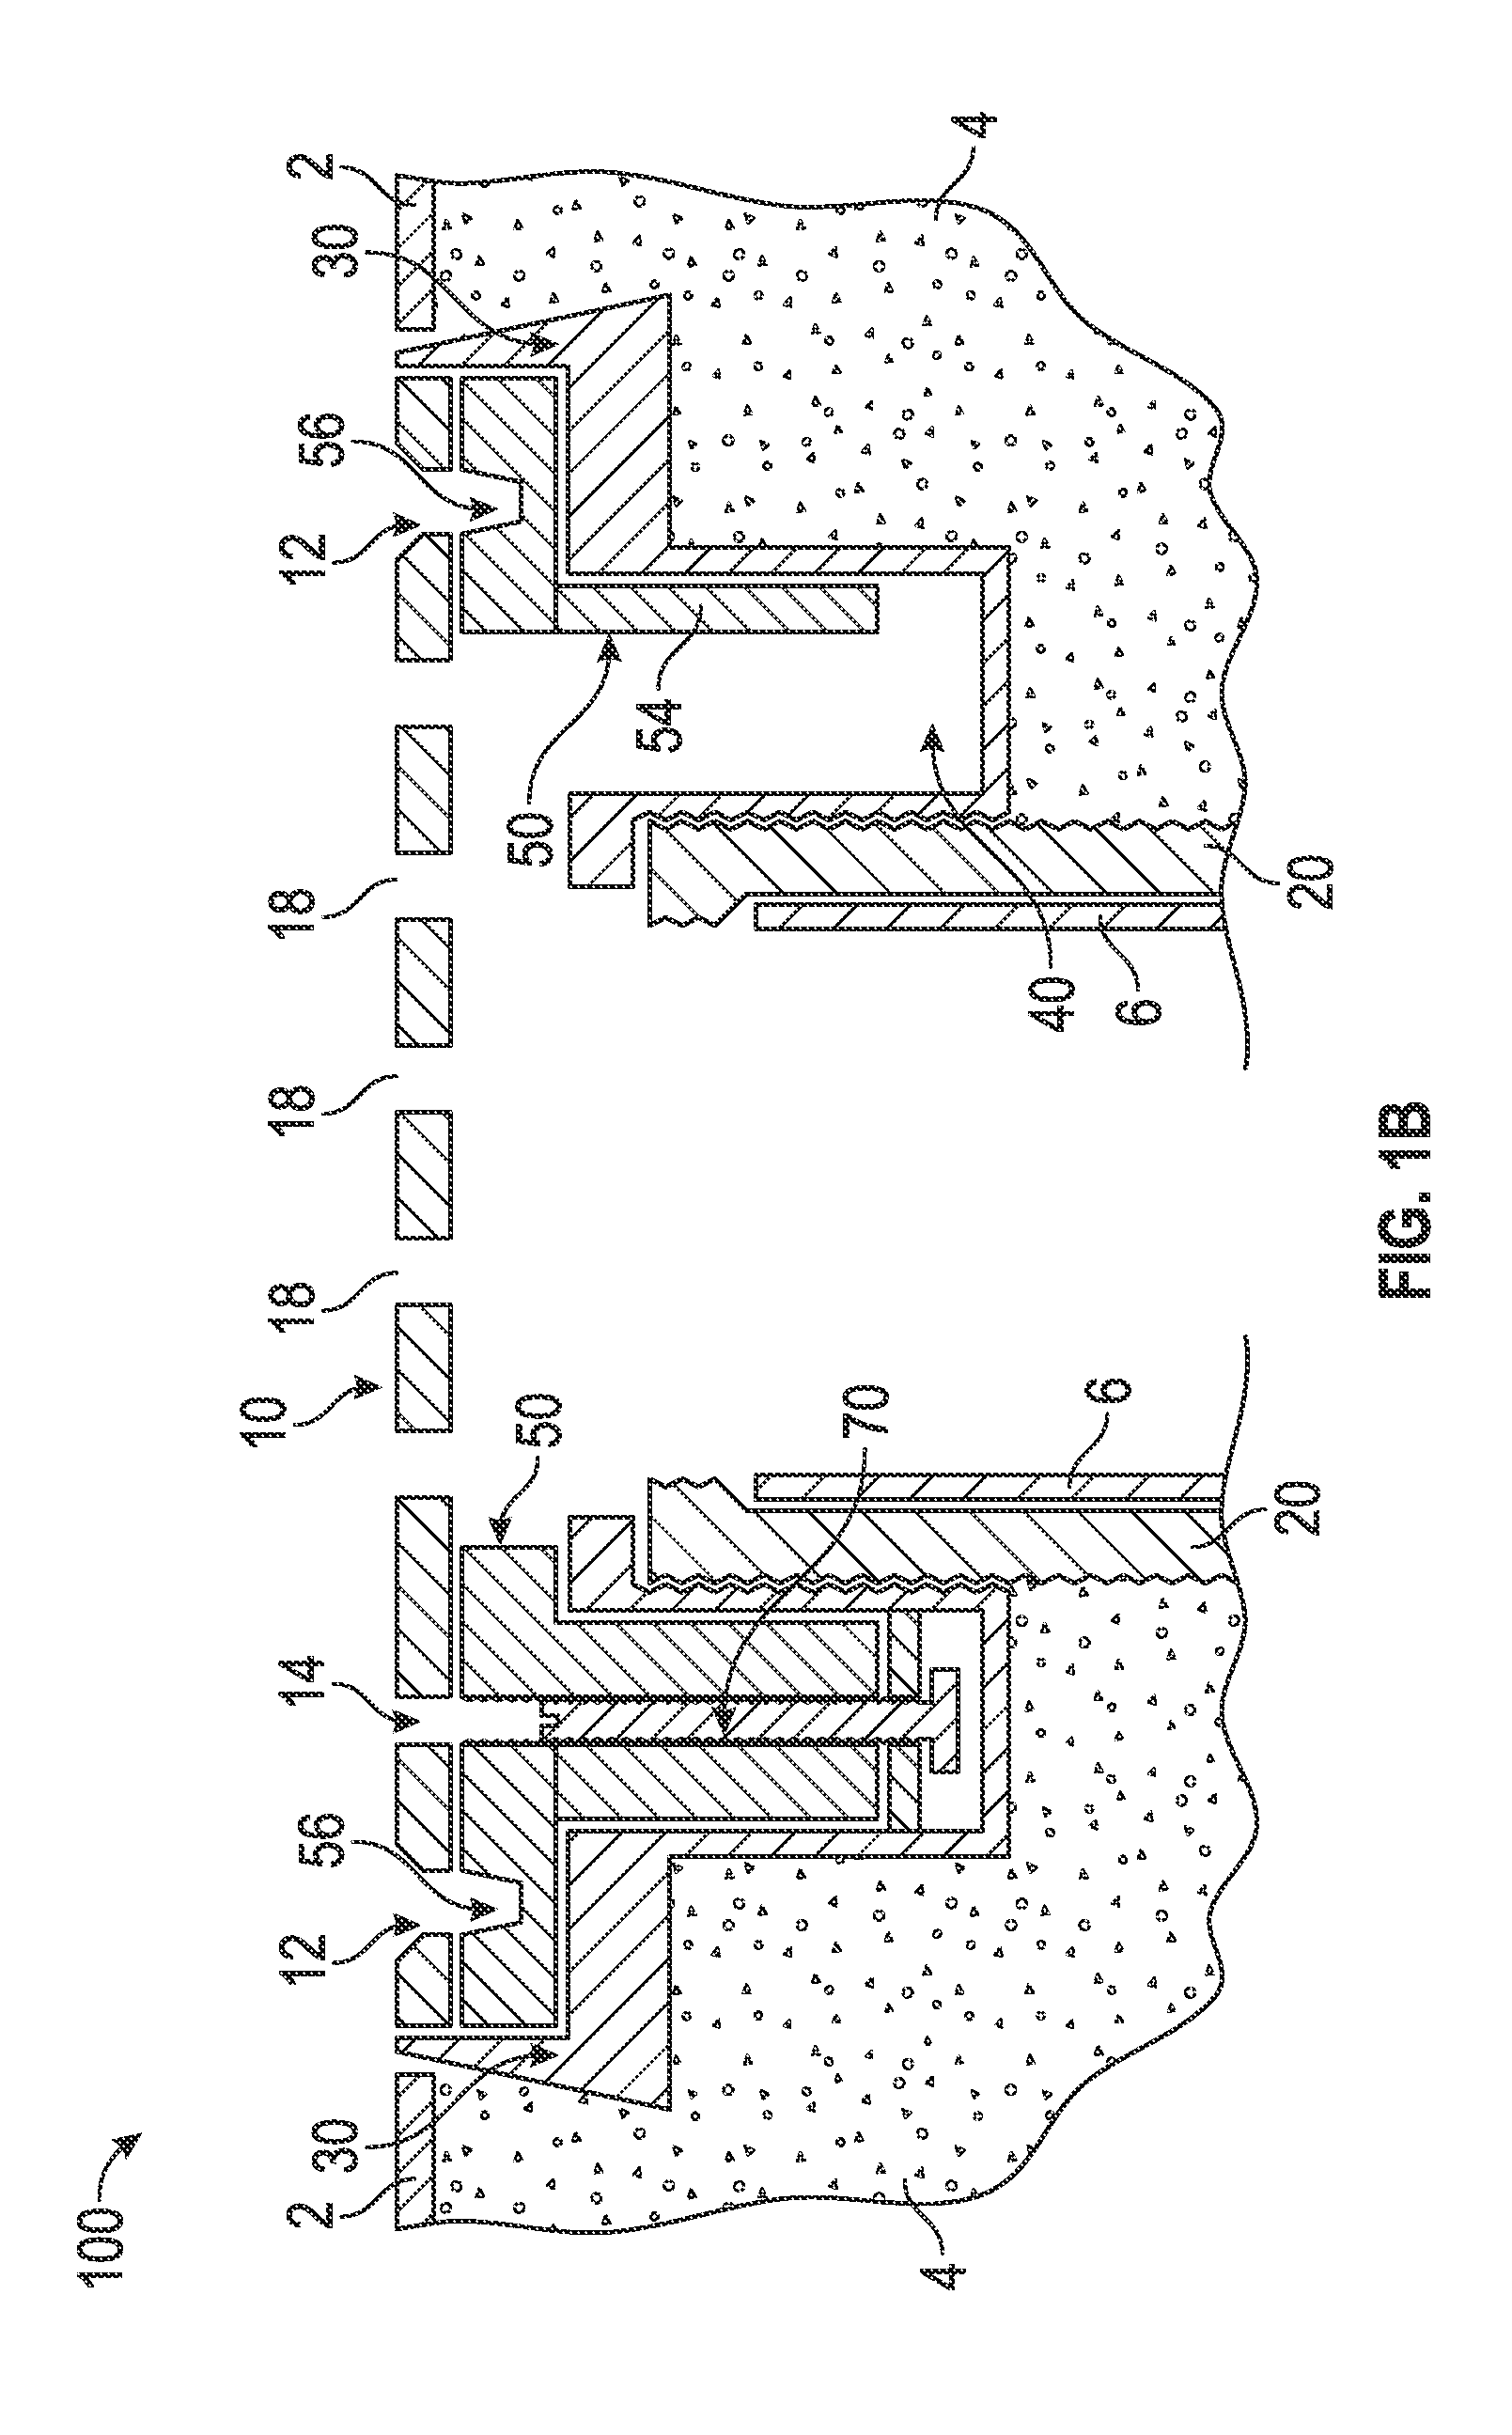 Drain and drain leveling mechanism